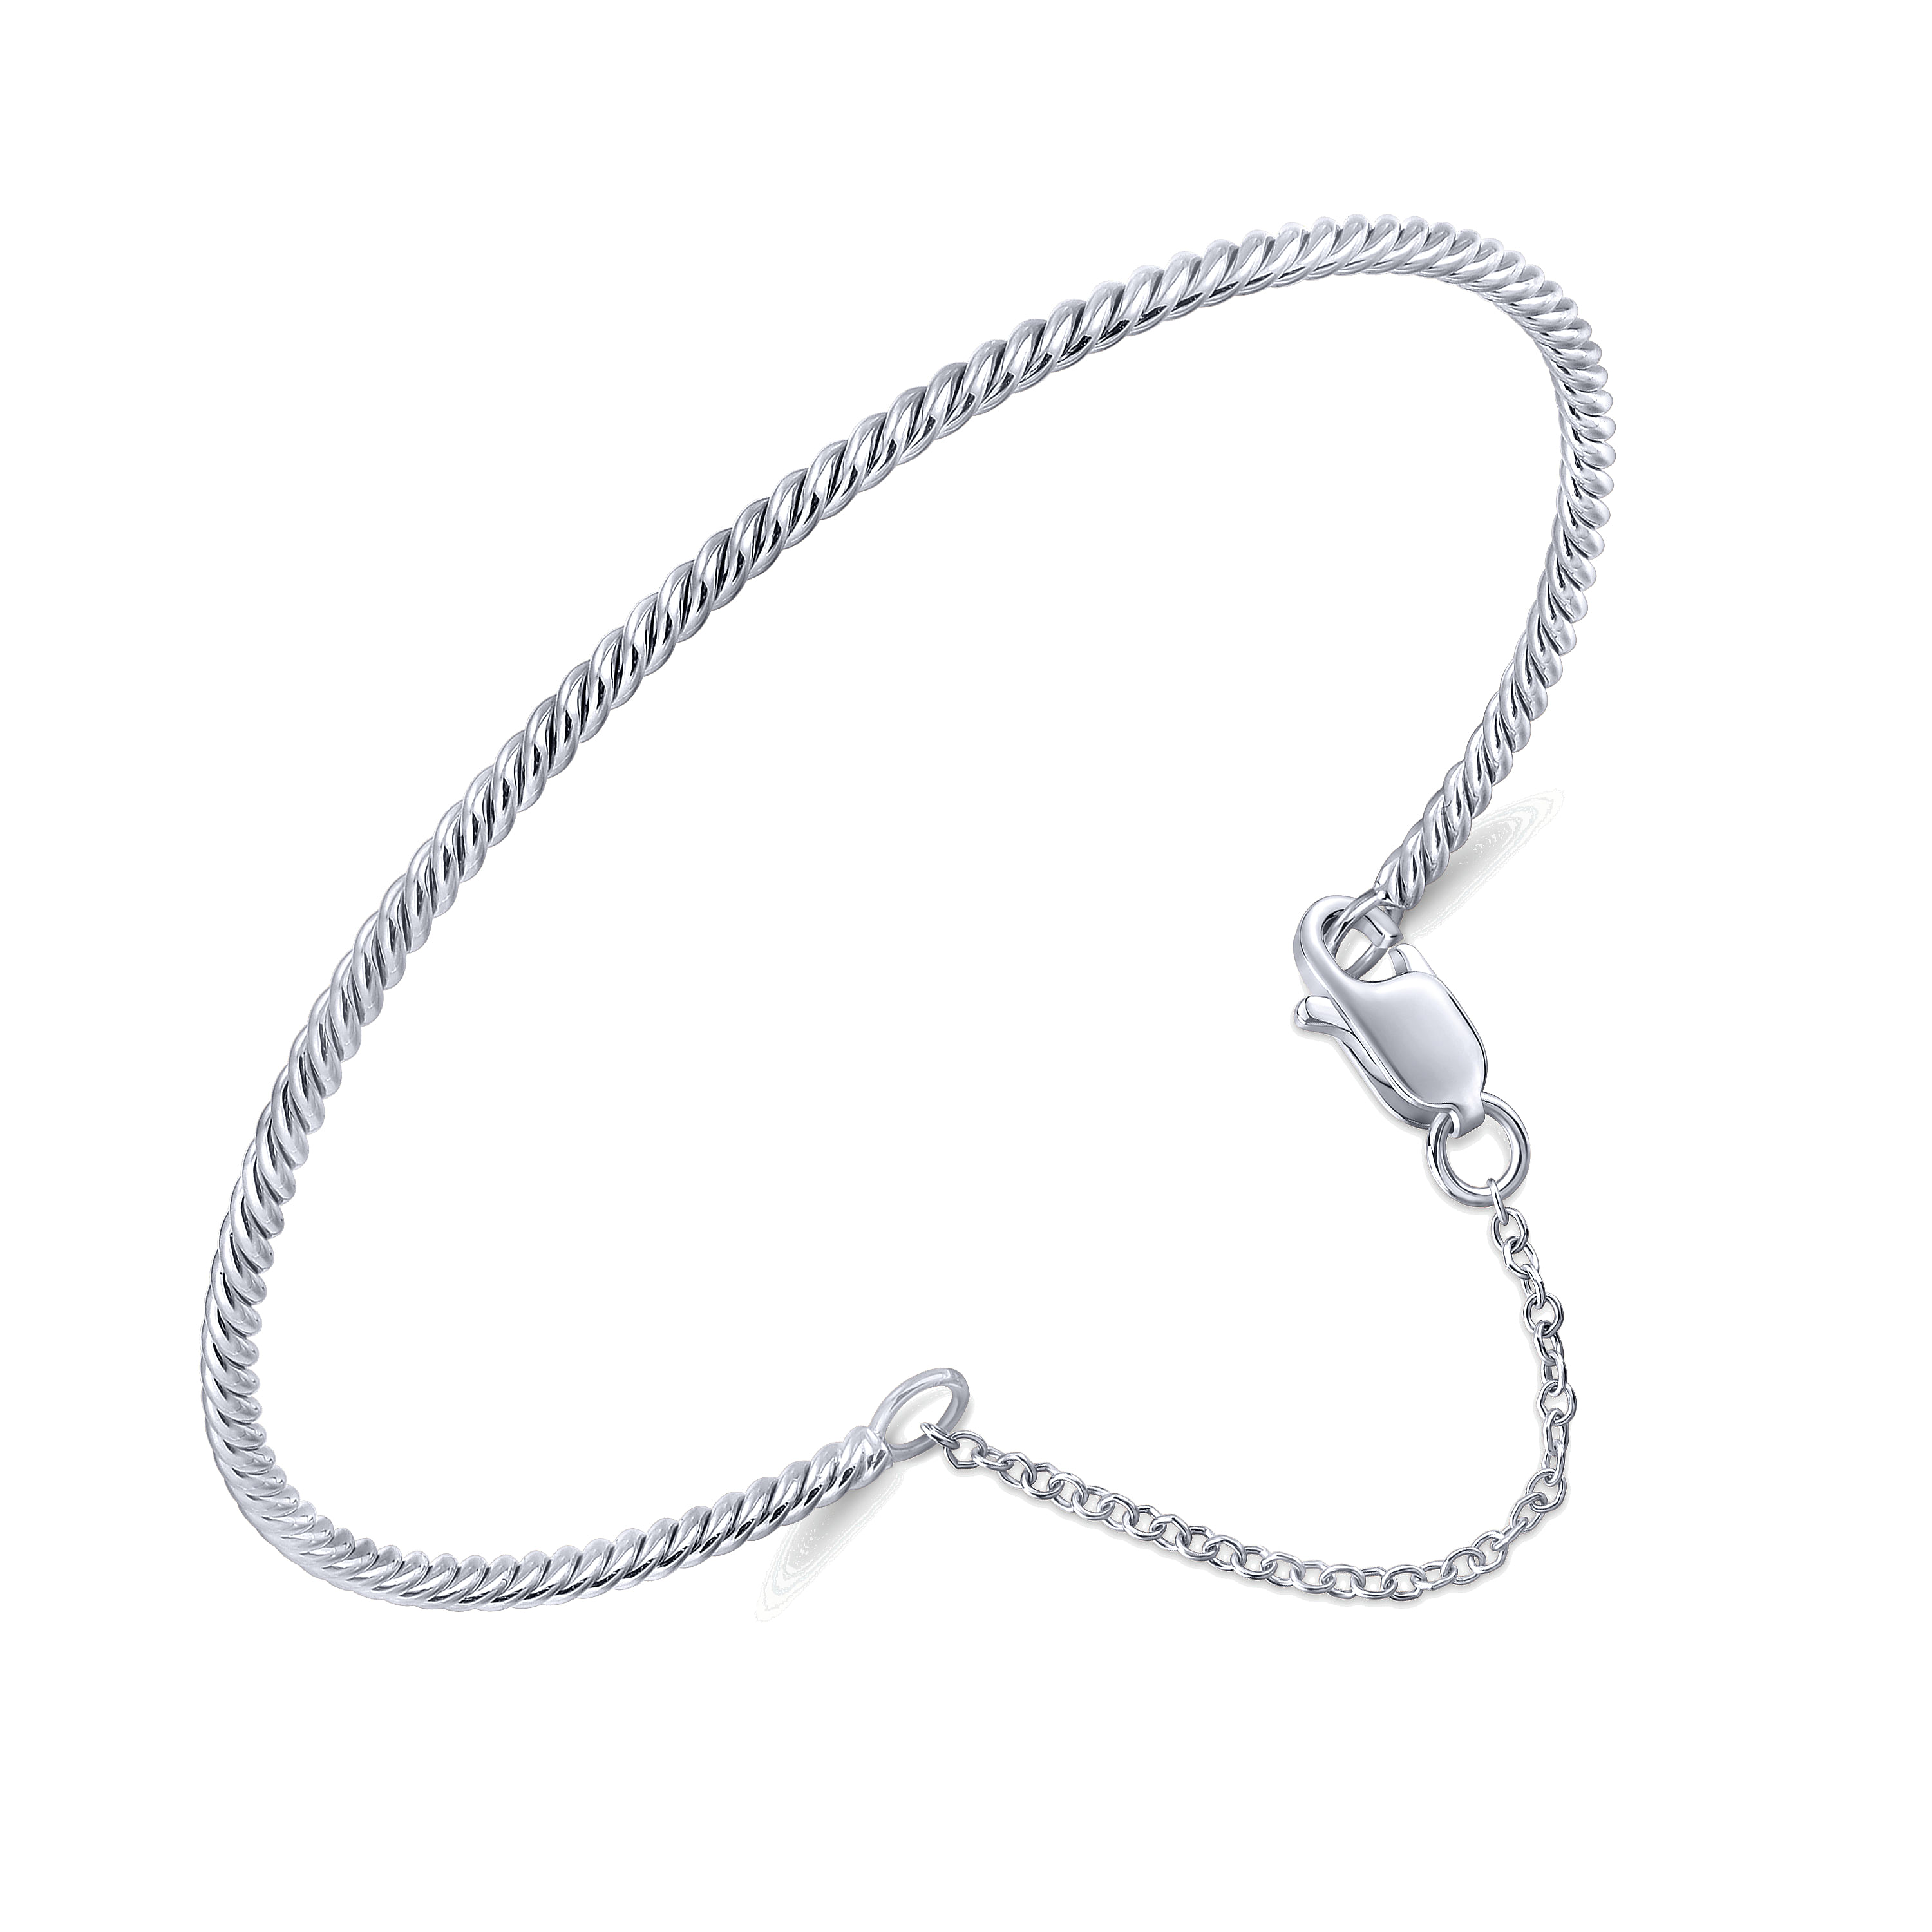 14K White Gold Twisted Bangle with Chain Drop